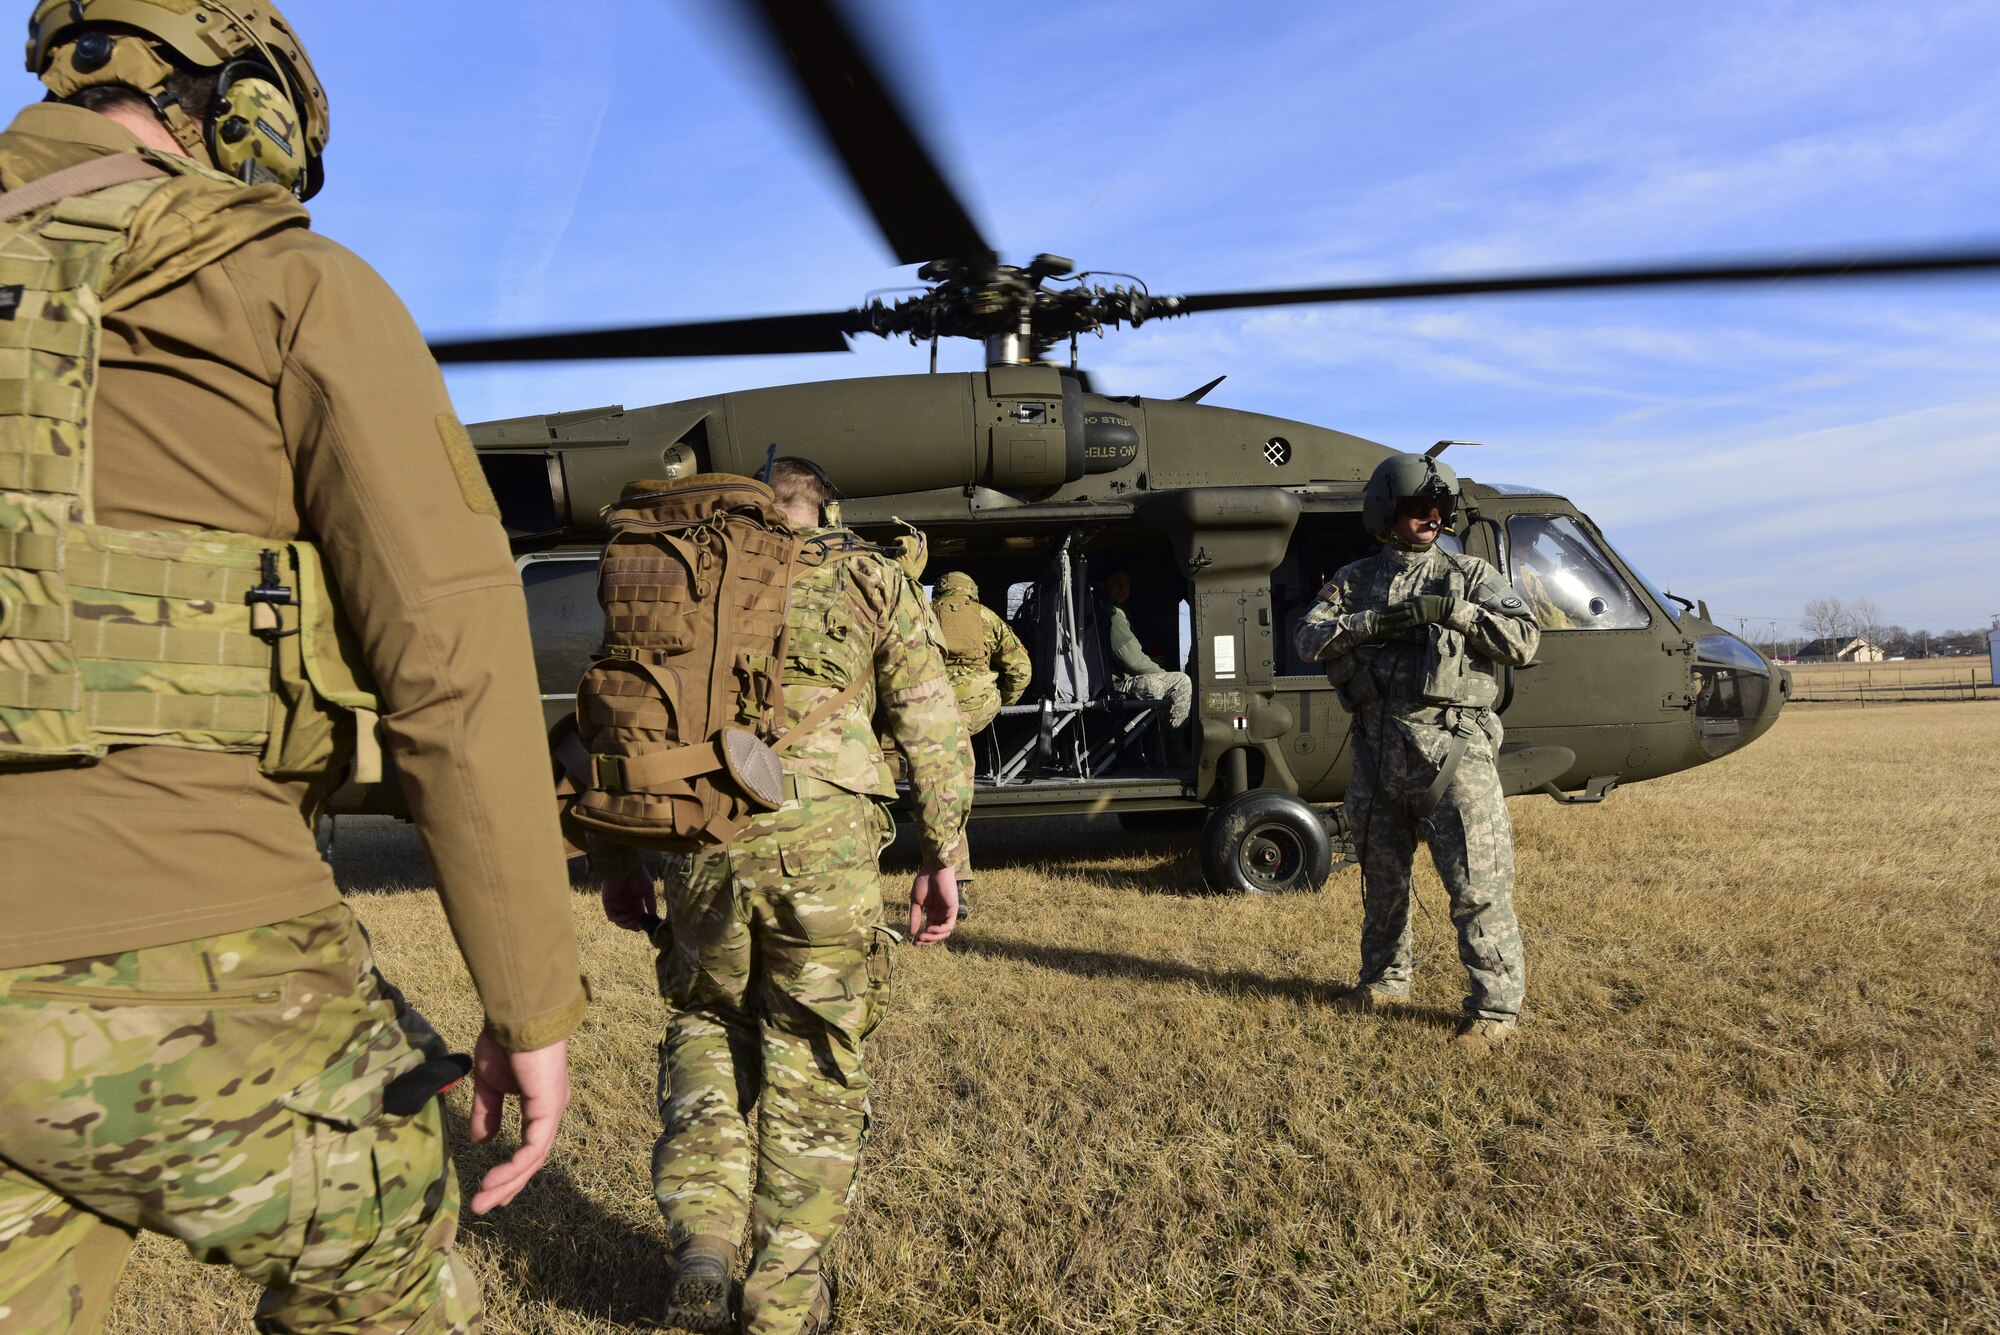 Joint Terminal Attack Controllers assigned to the 7th Air Support Operations Squadron from Fort Bliss,Texas, enter a UH-0 Black Hawk during a joint training mission at Warsaw, Mo., Jan. 31, 2018. The joint training, titled Truman Relief, involved the 509th Bomb Wing and 1-135th Assault Helicopter Battalion from Whiteman Air Force Base, Mo. (U.S. Air Force by Staff Sgt. Danielle Quilla)